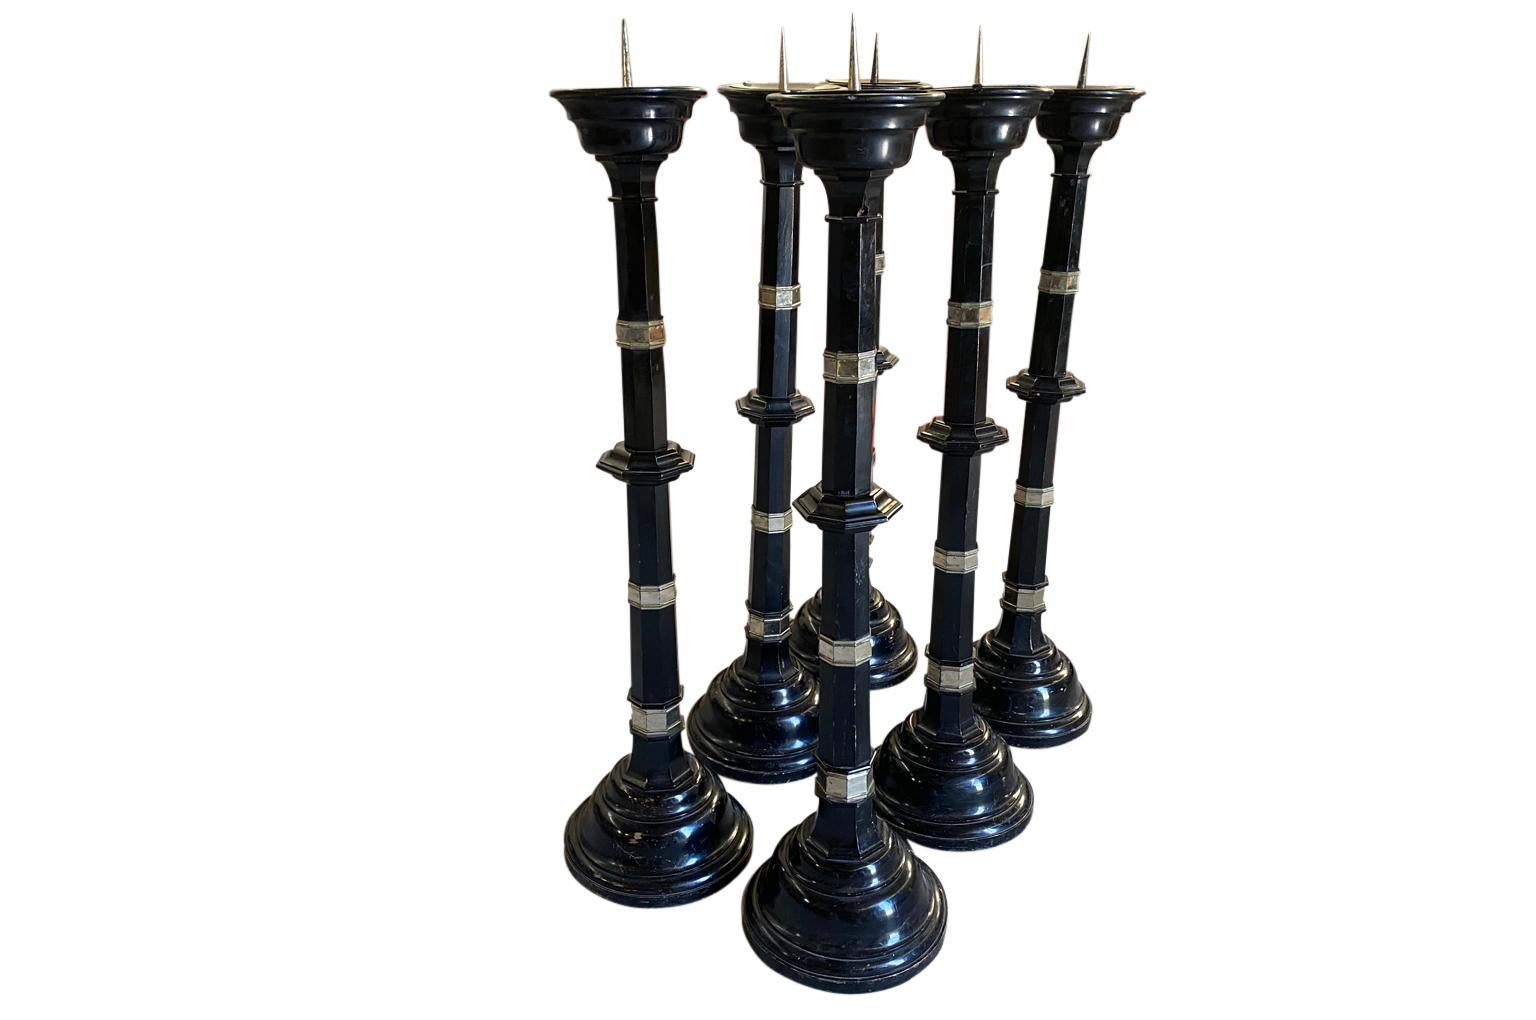 Set of 6 Mid-19th Century Lacquered Pique Cierges, Torcheres In Good Condition For Sale In Atlanta, GA